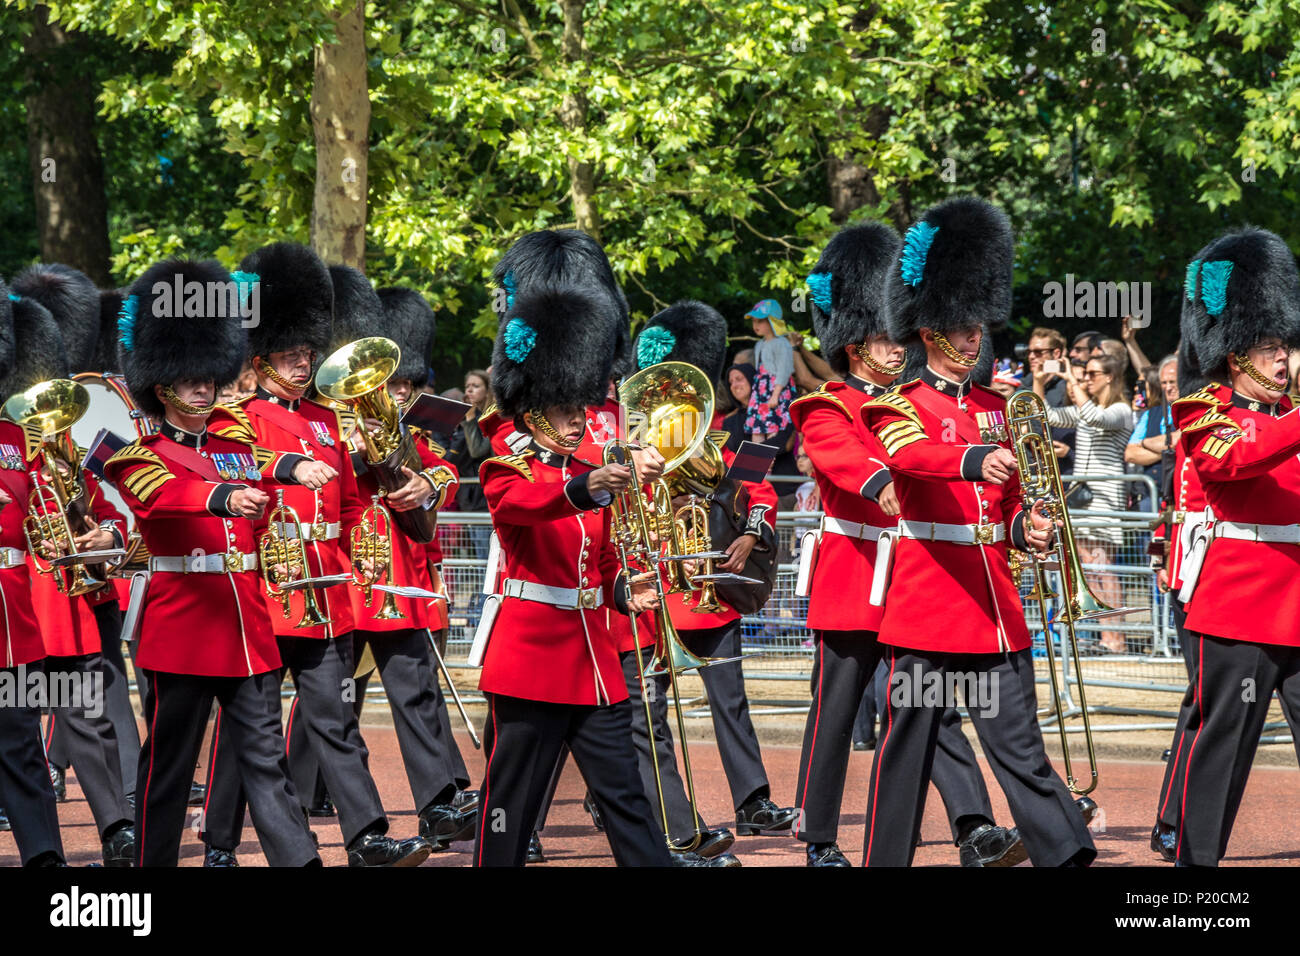 The Massed Bands of the Guards Division marching along The Mall at The Queen's Birthday Parade also known as Trooping The Colour, London, UK Stock Photo